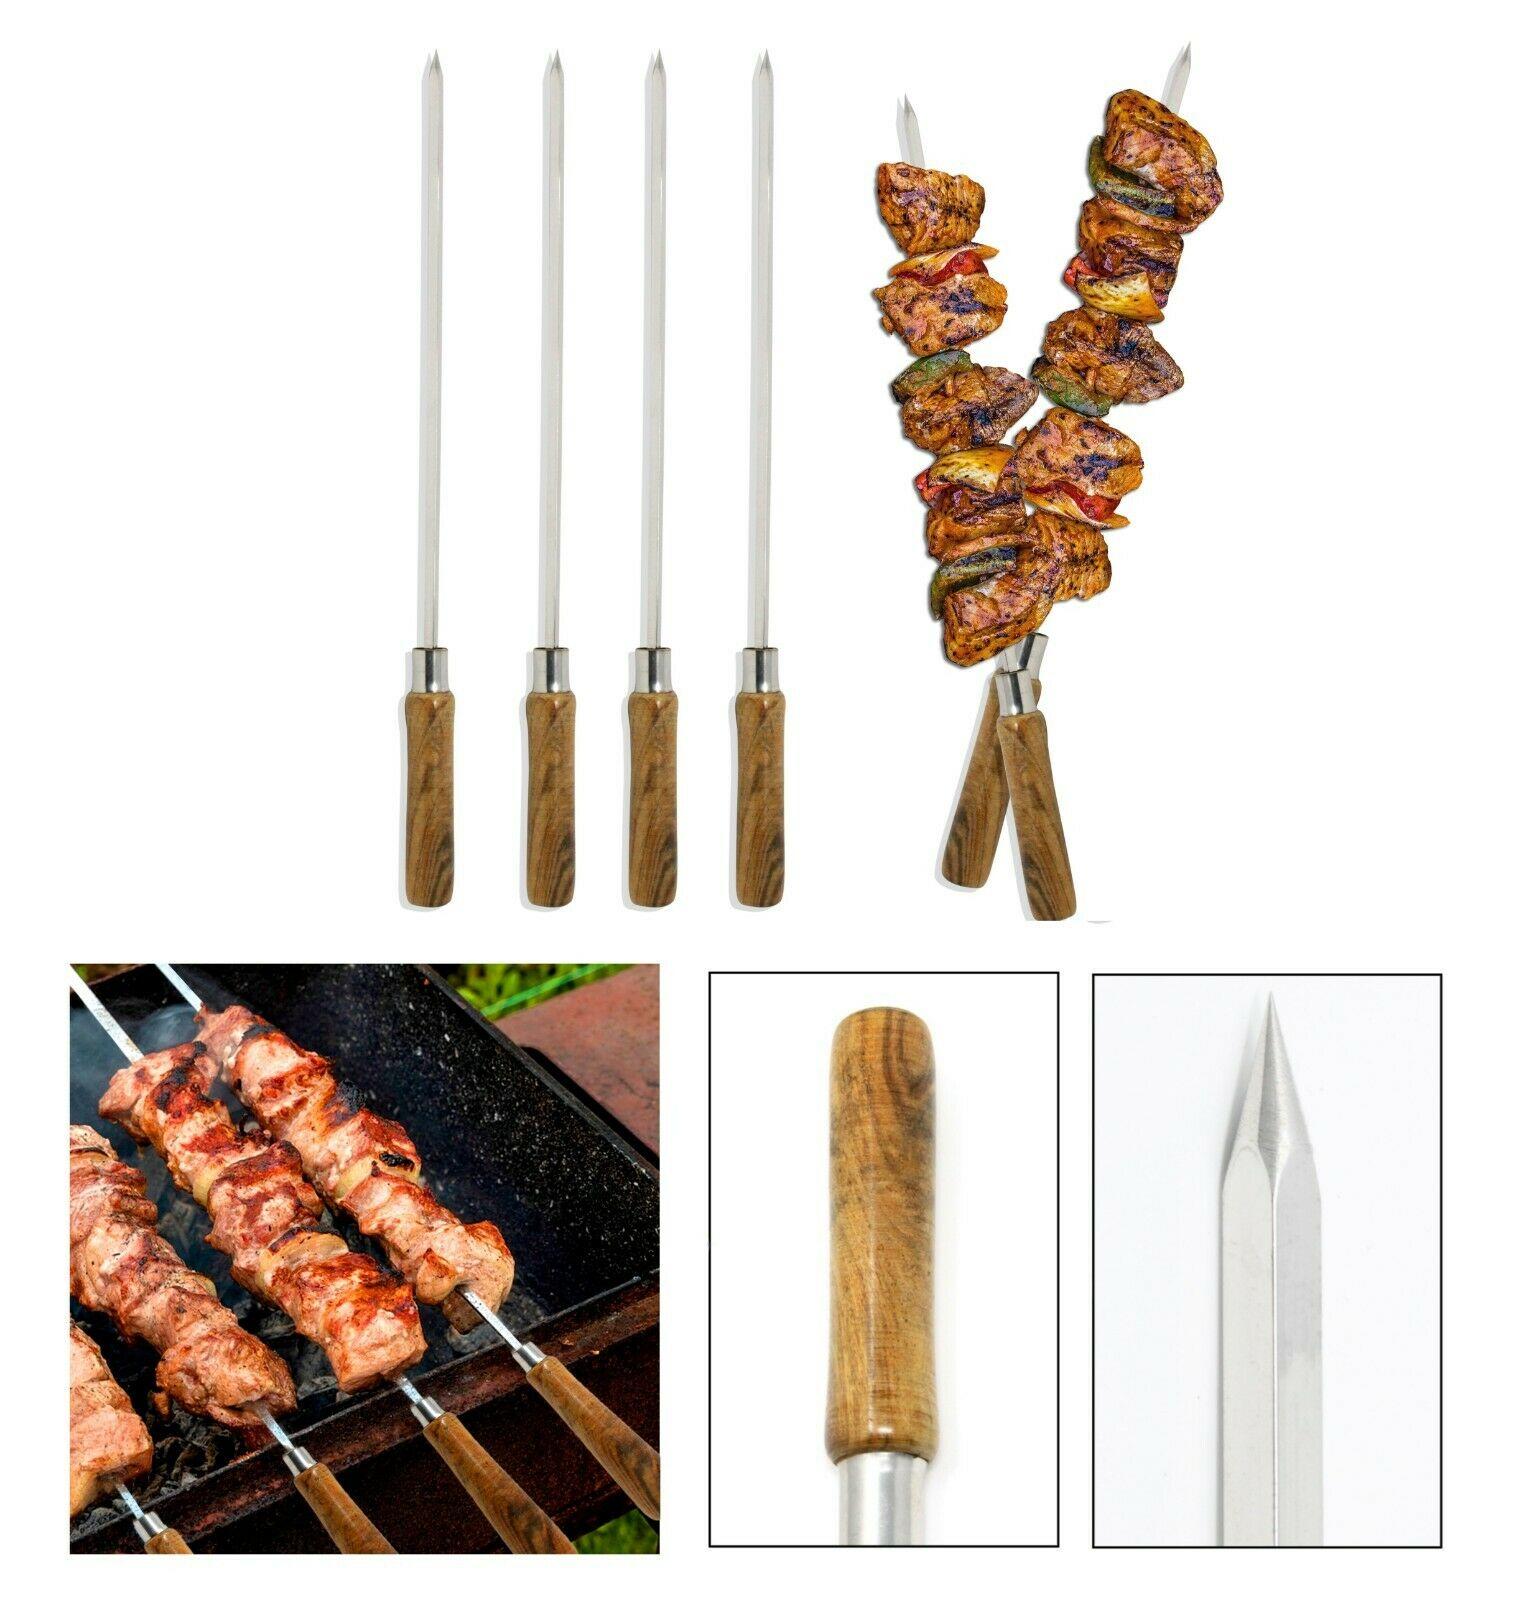 Details about   Vegetable Kebab 10 x 38cm Barbecue BBQ Meat Kitchen Metal SKEWERS 